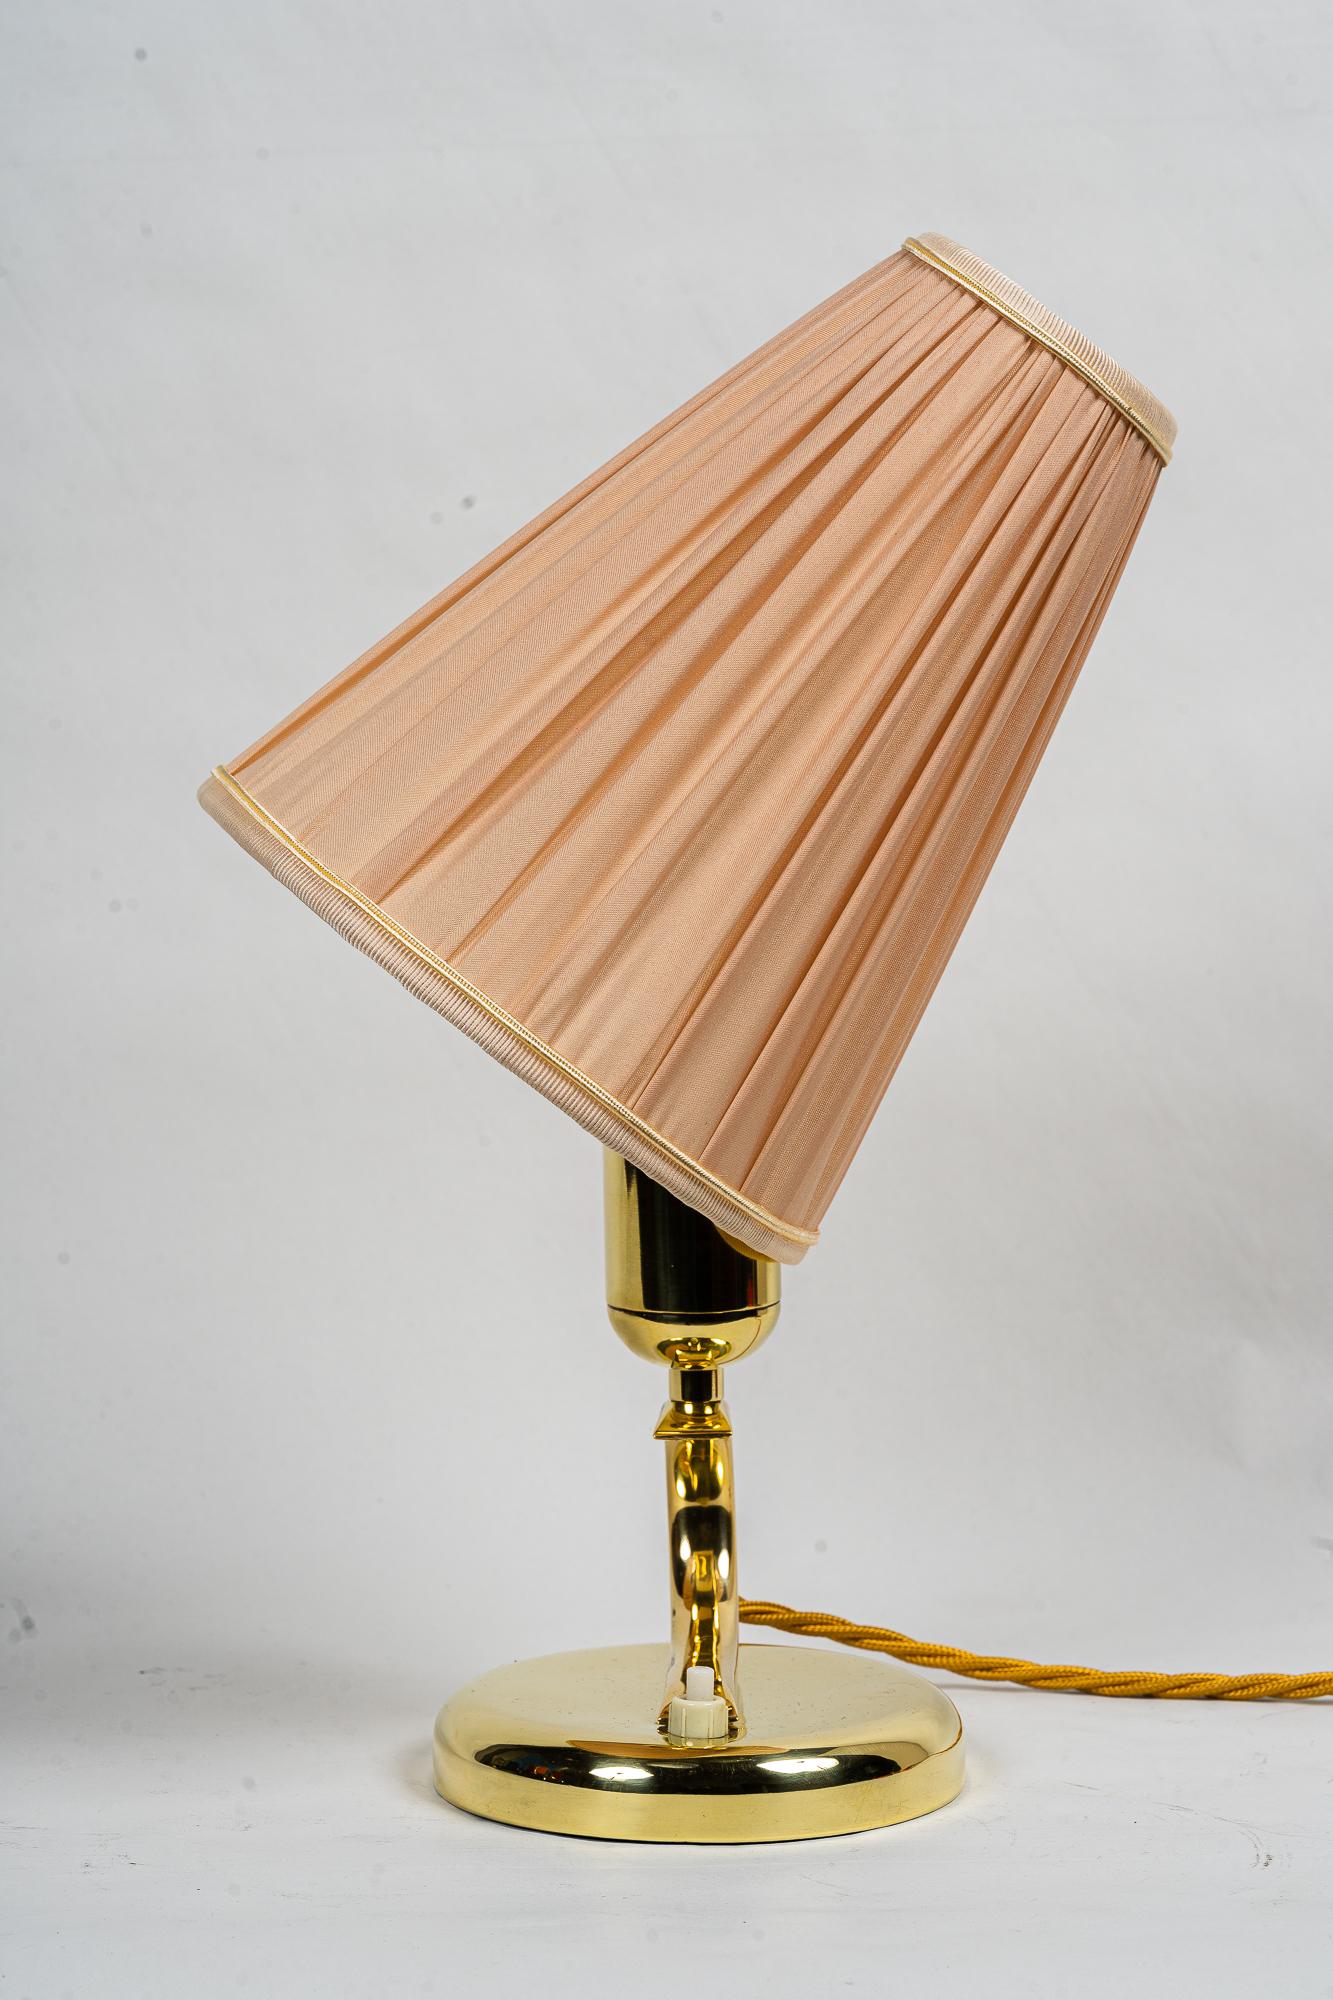 Table lamp with fabric shade vienna around 1960s
Polished and stove enameled
The fabric shade is replaced ( new )